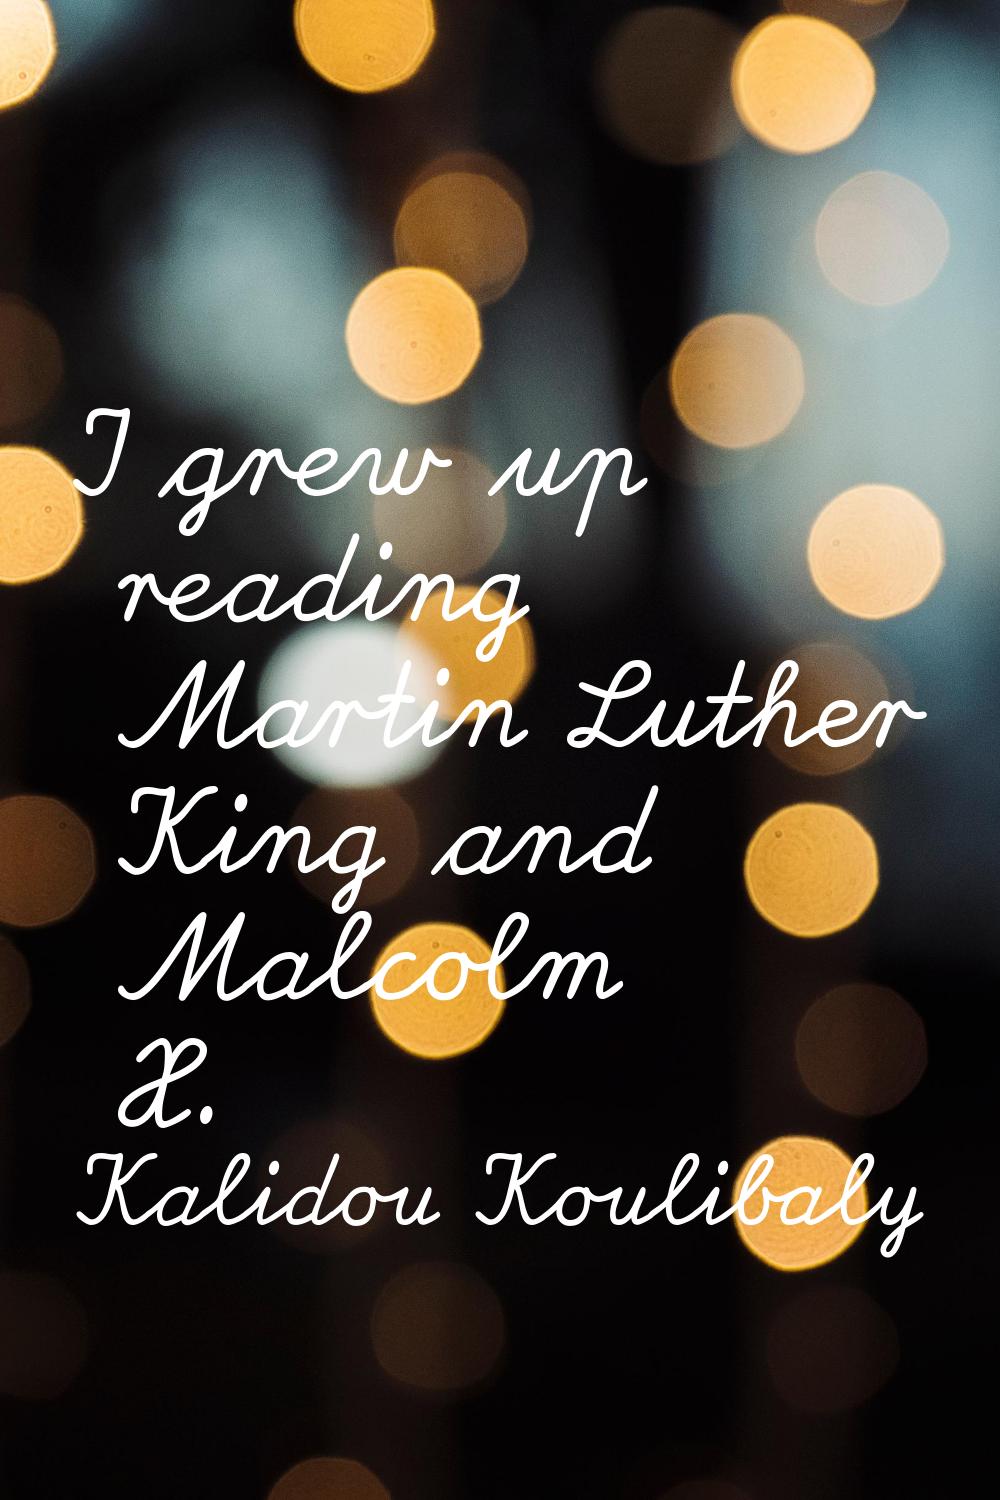 I grew up reading Martin Luther King and Malcolm X.